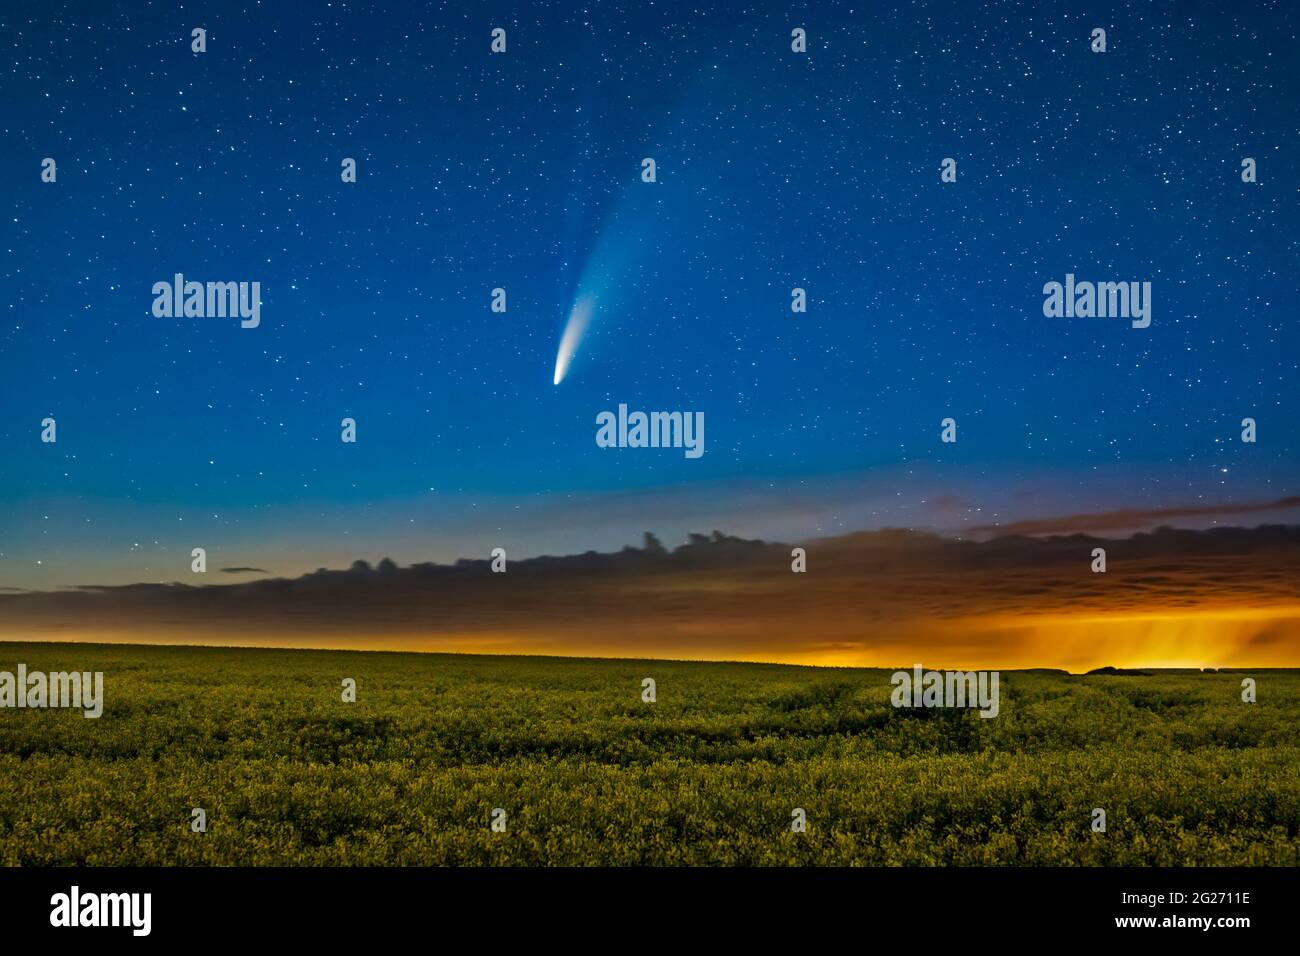 Comet NEOWISE over a ripening canola field in southern Alberta, Canada. Stock Photo